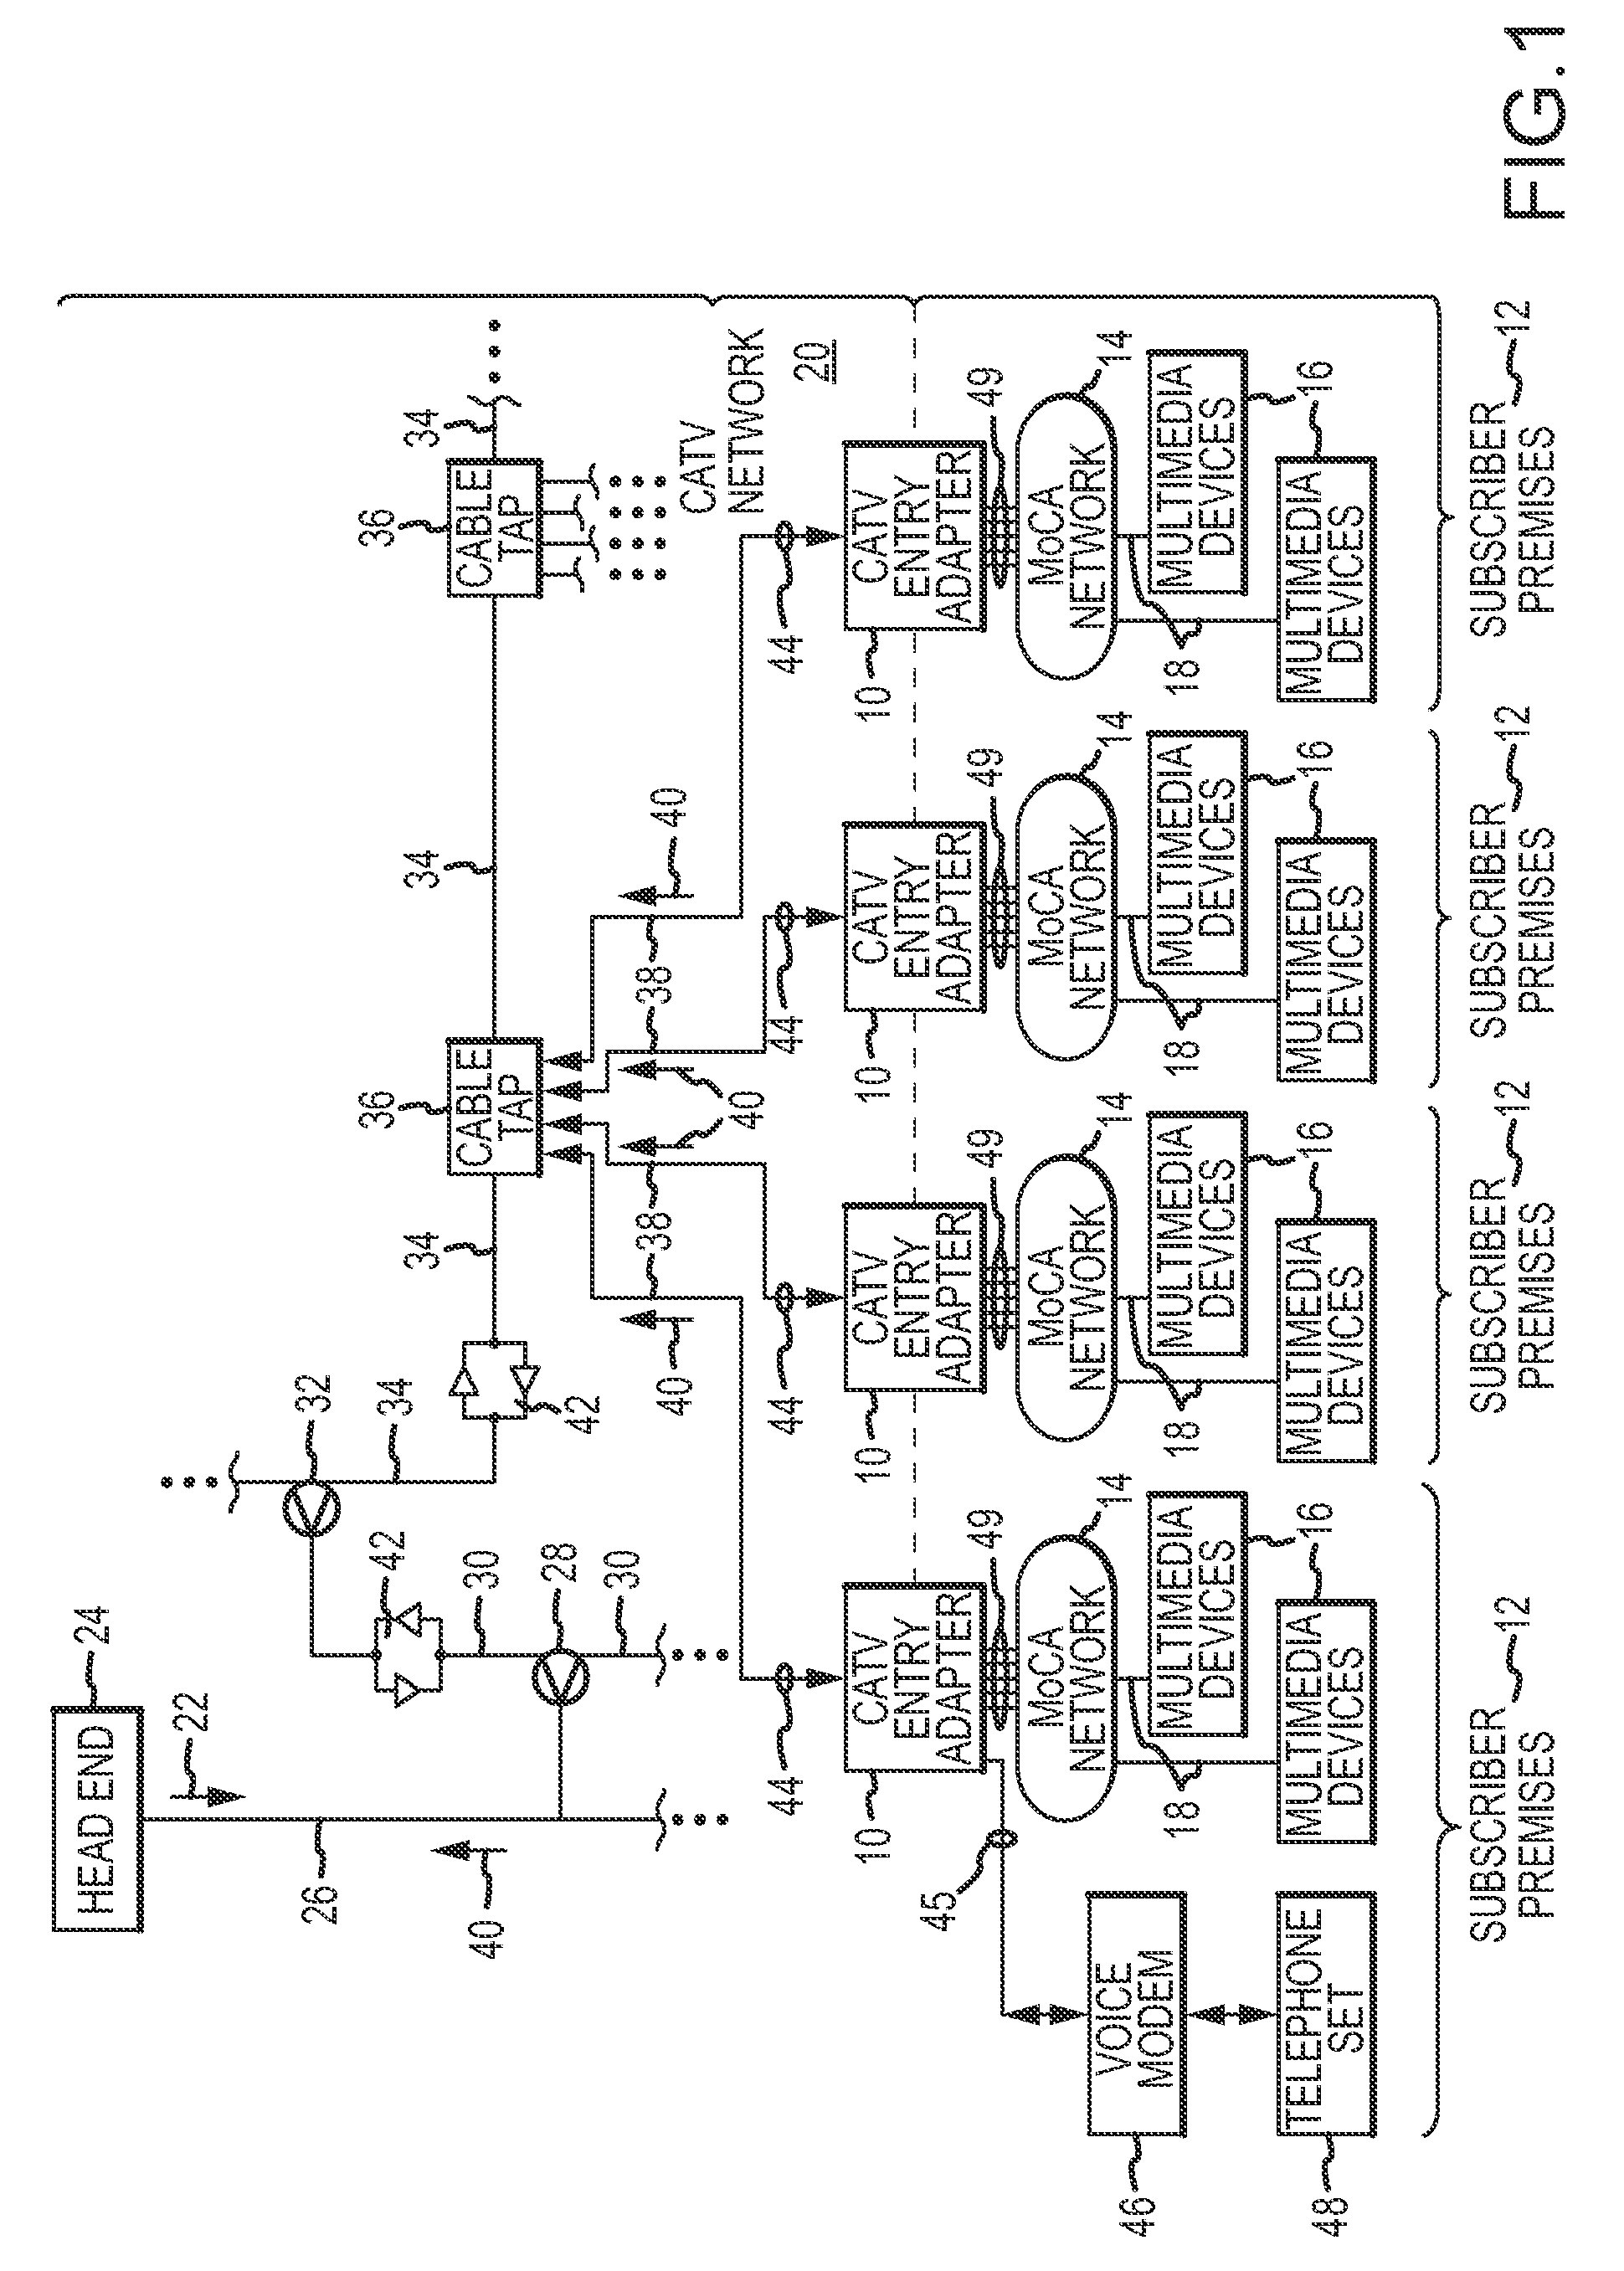 Multi-Port Entry Adapter, Hub and Method for Interfacing a CATV Network and a MoCA Network